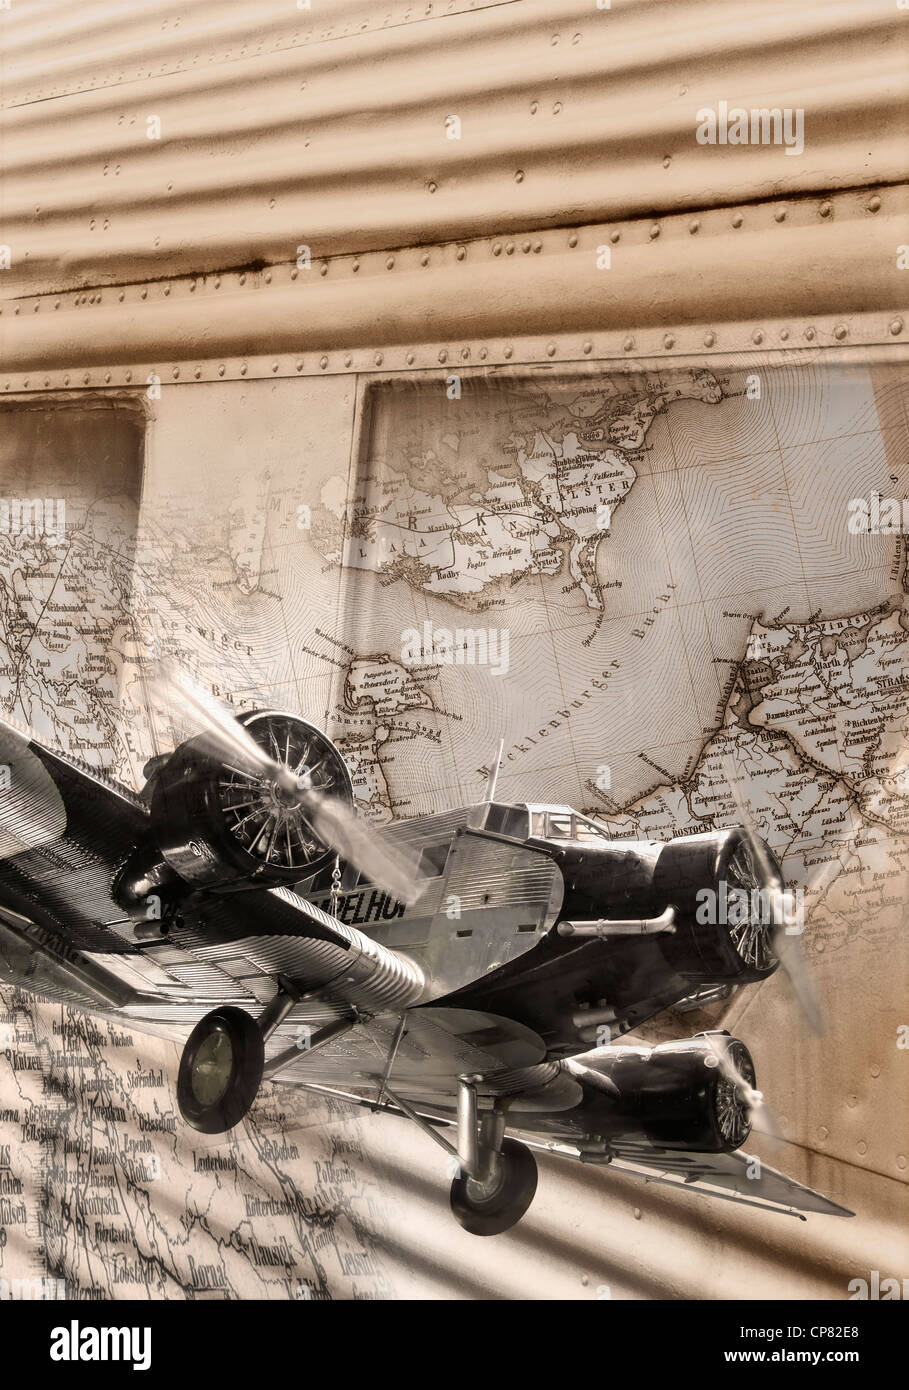 Composing of a Junkers-52 with portions of a historic map of Germany Stock Photo